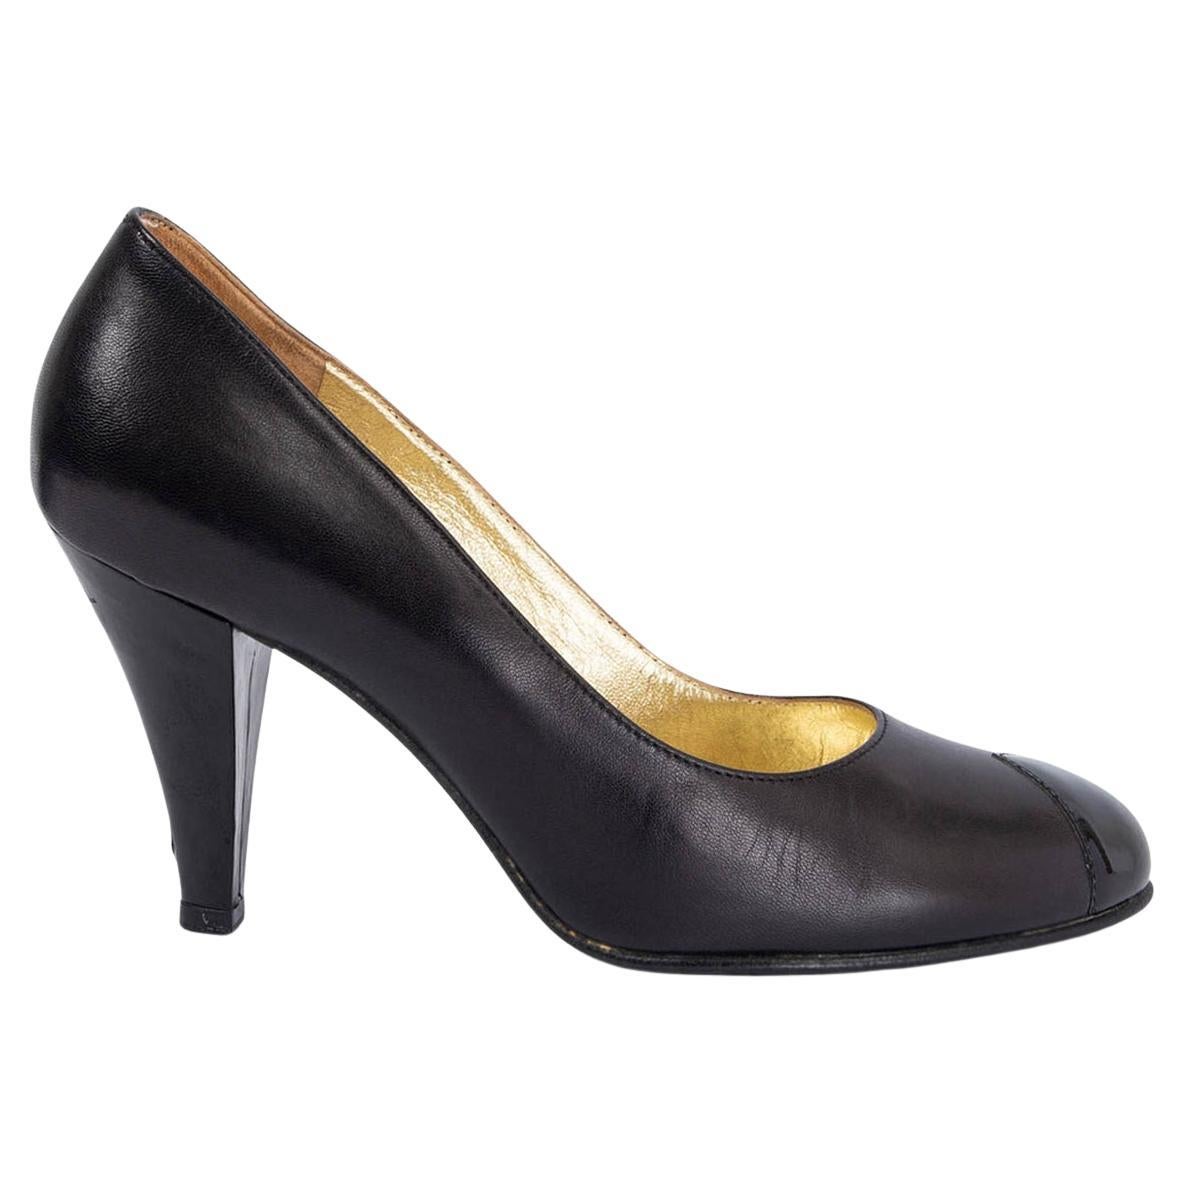 CHANEL black leather & patent Round Toe Pumps Shoes